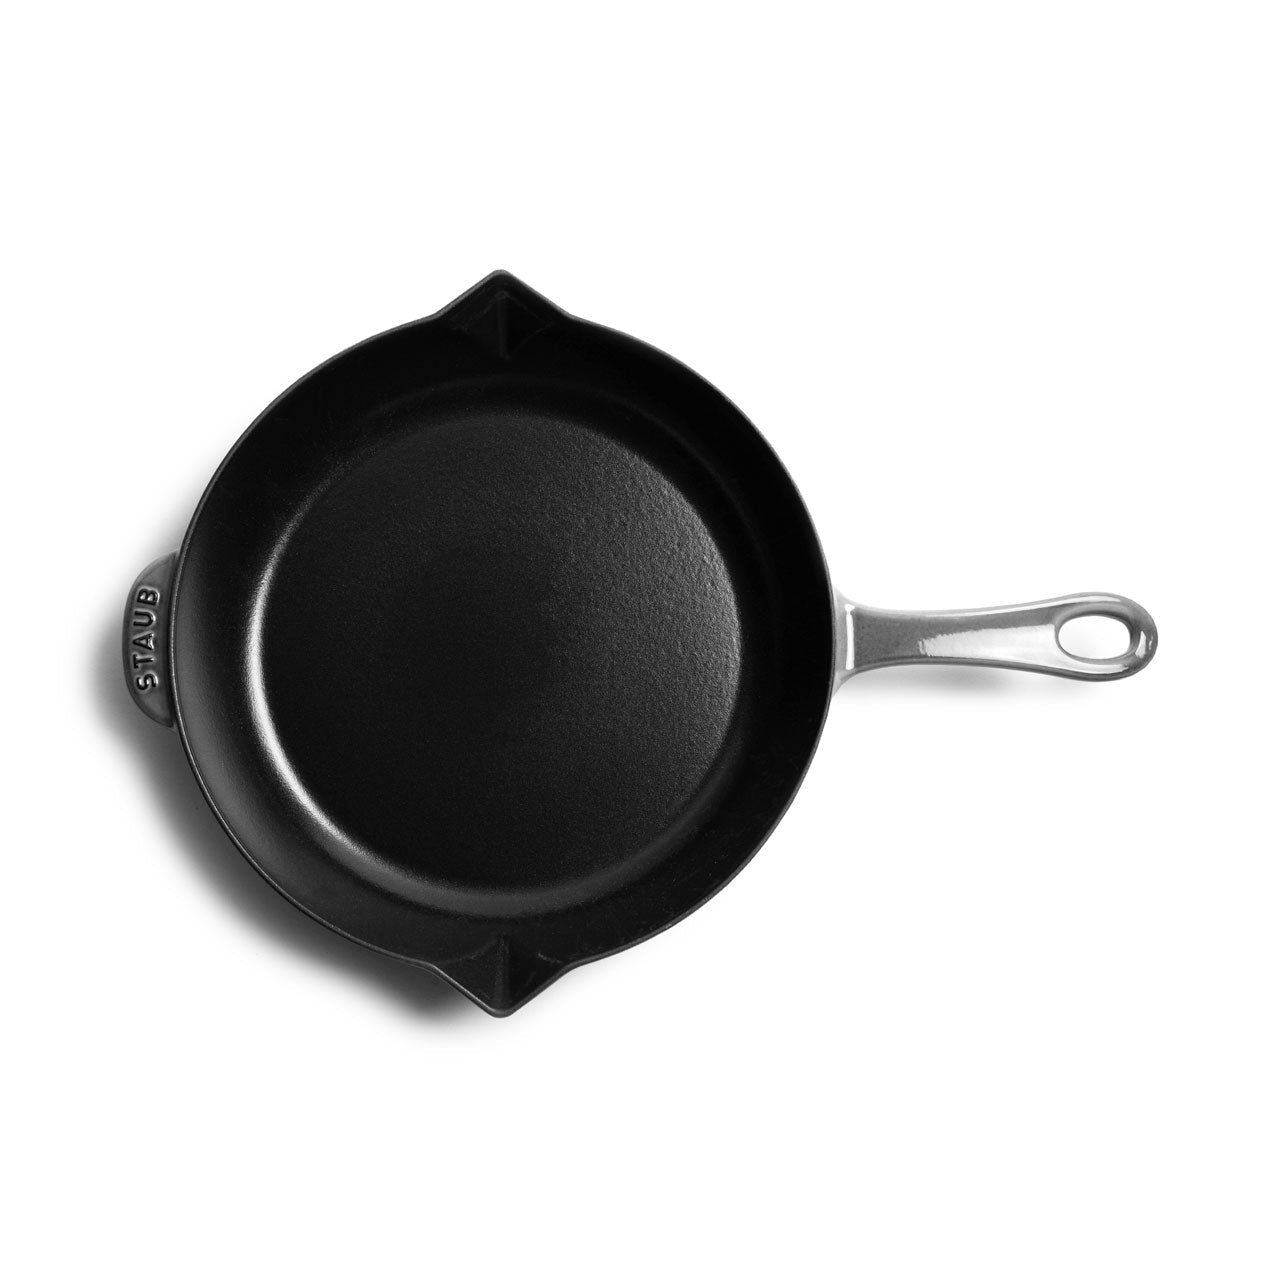 Lodge's Cast Iron Deep Skillet Is on Sale for $40